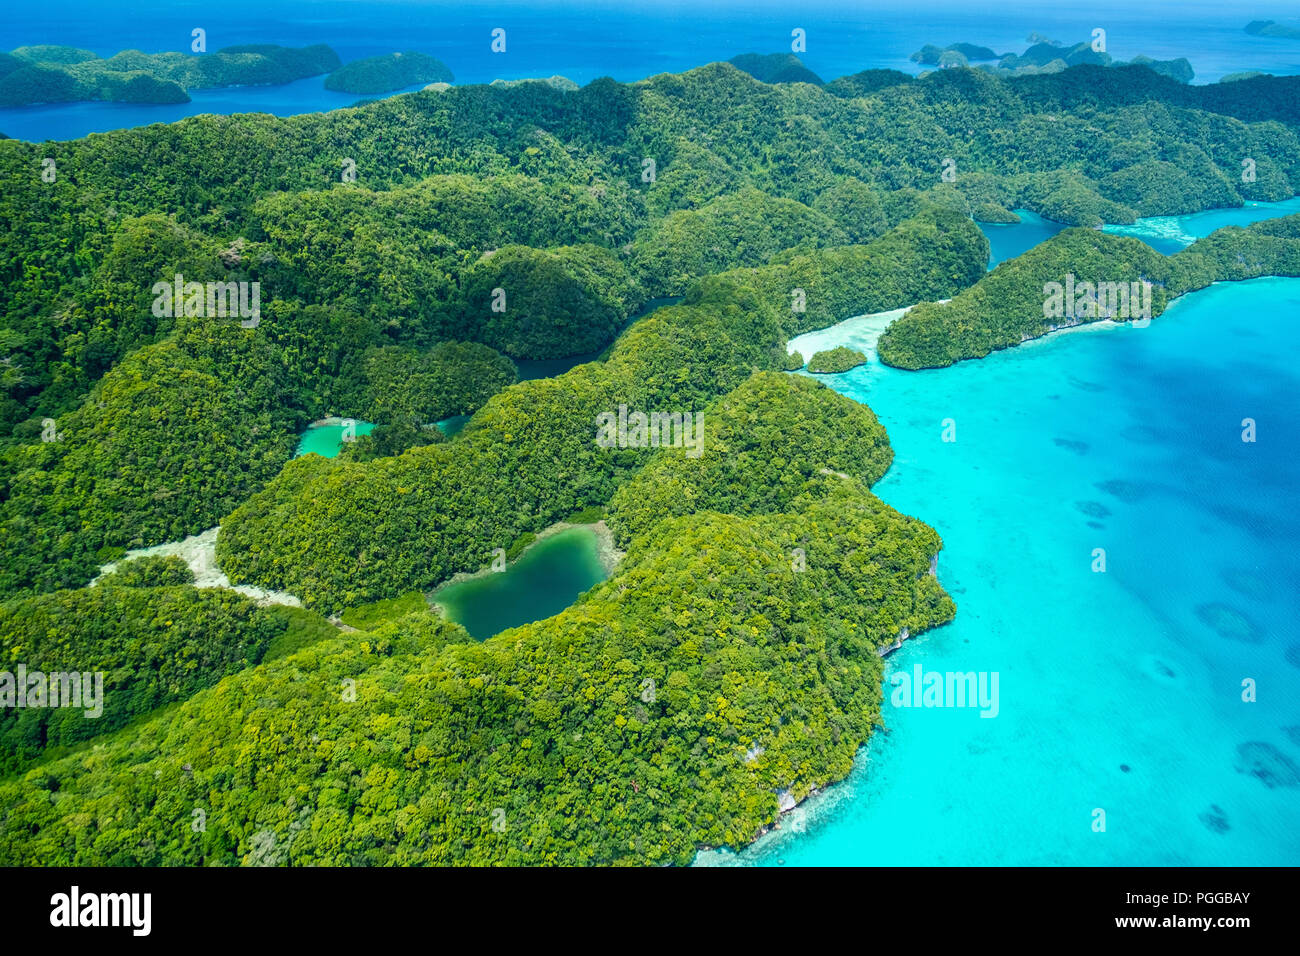 Beautiful view of Palau tropical islands and Pacific ocean from above Stock Photo